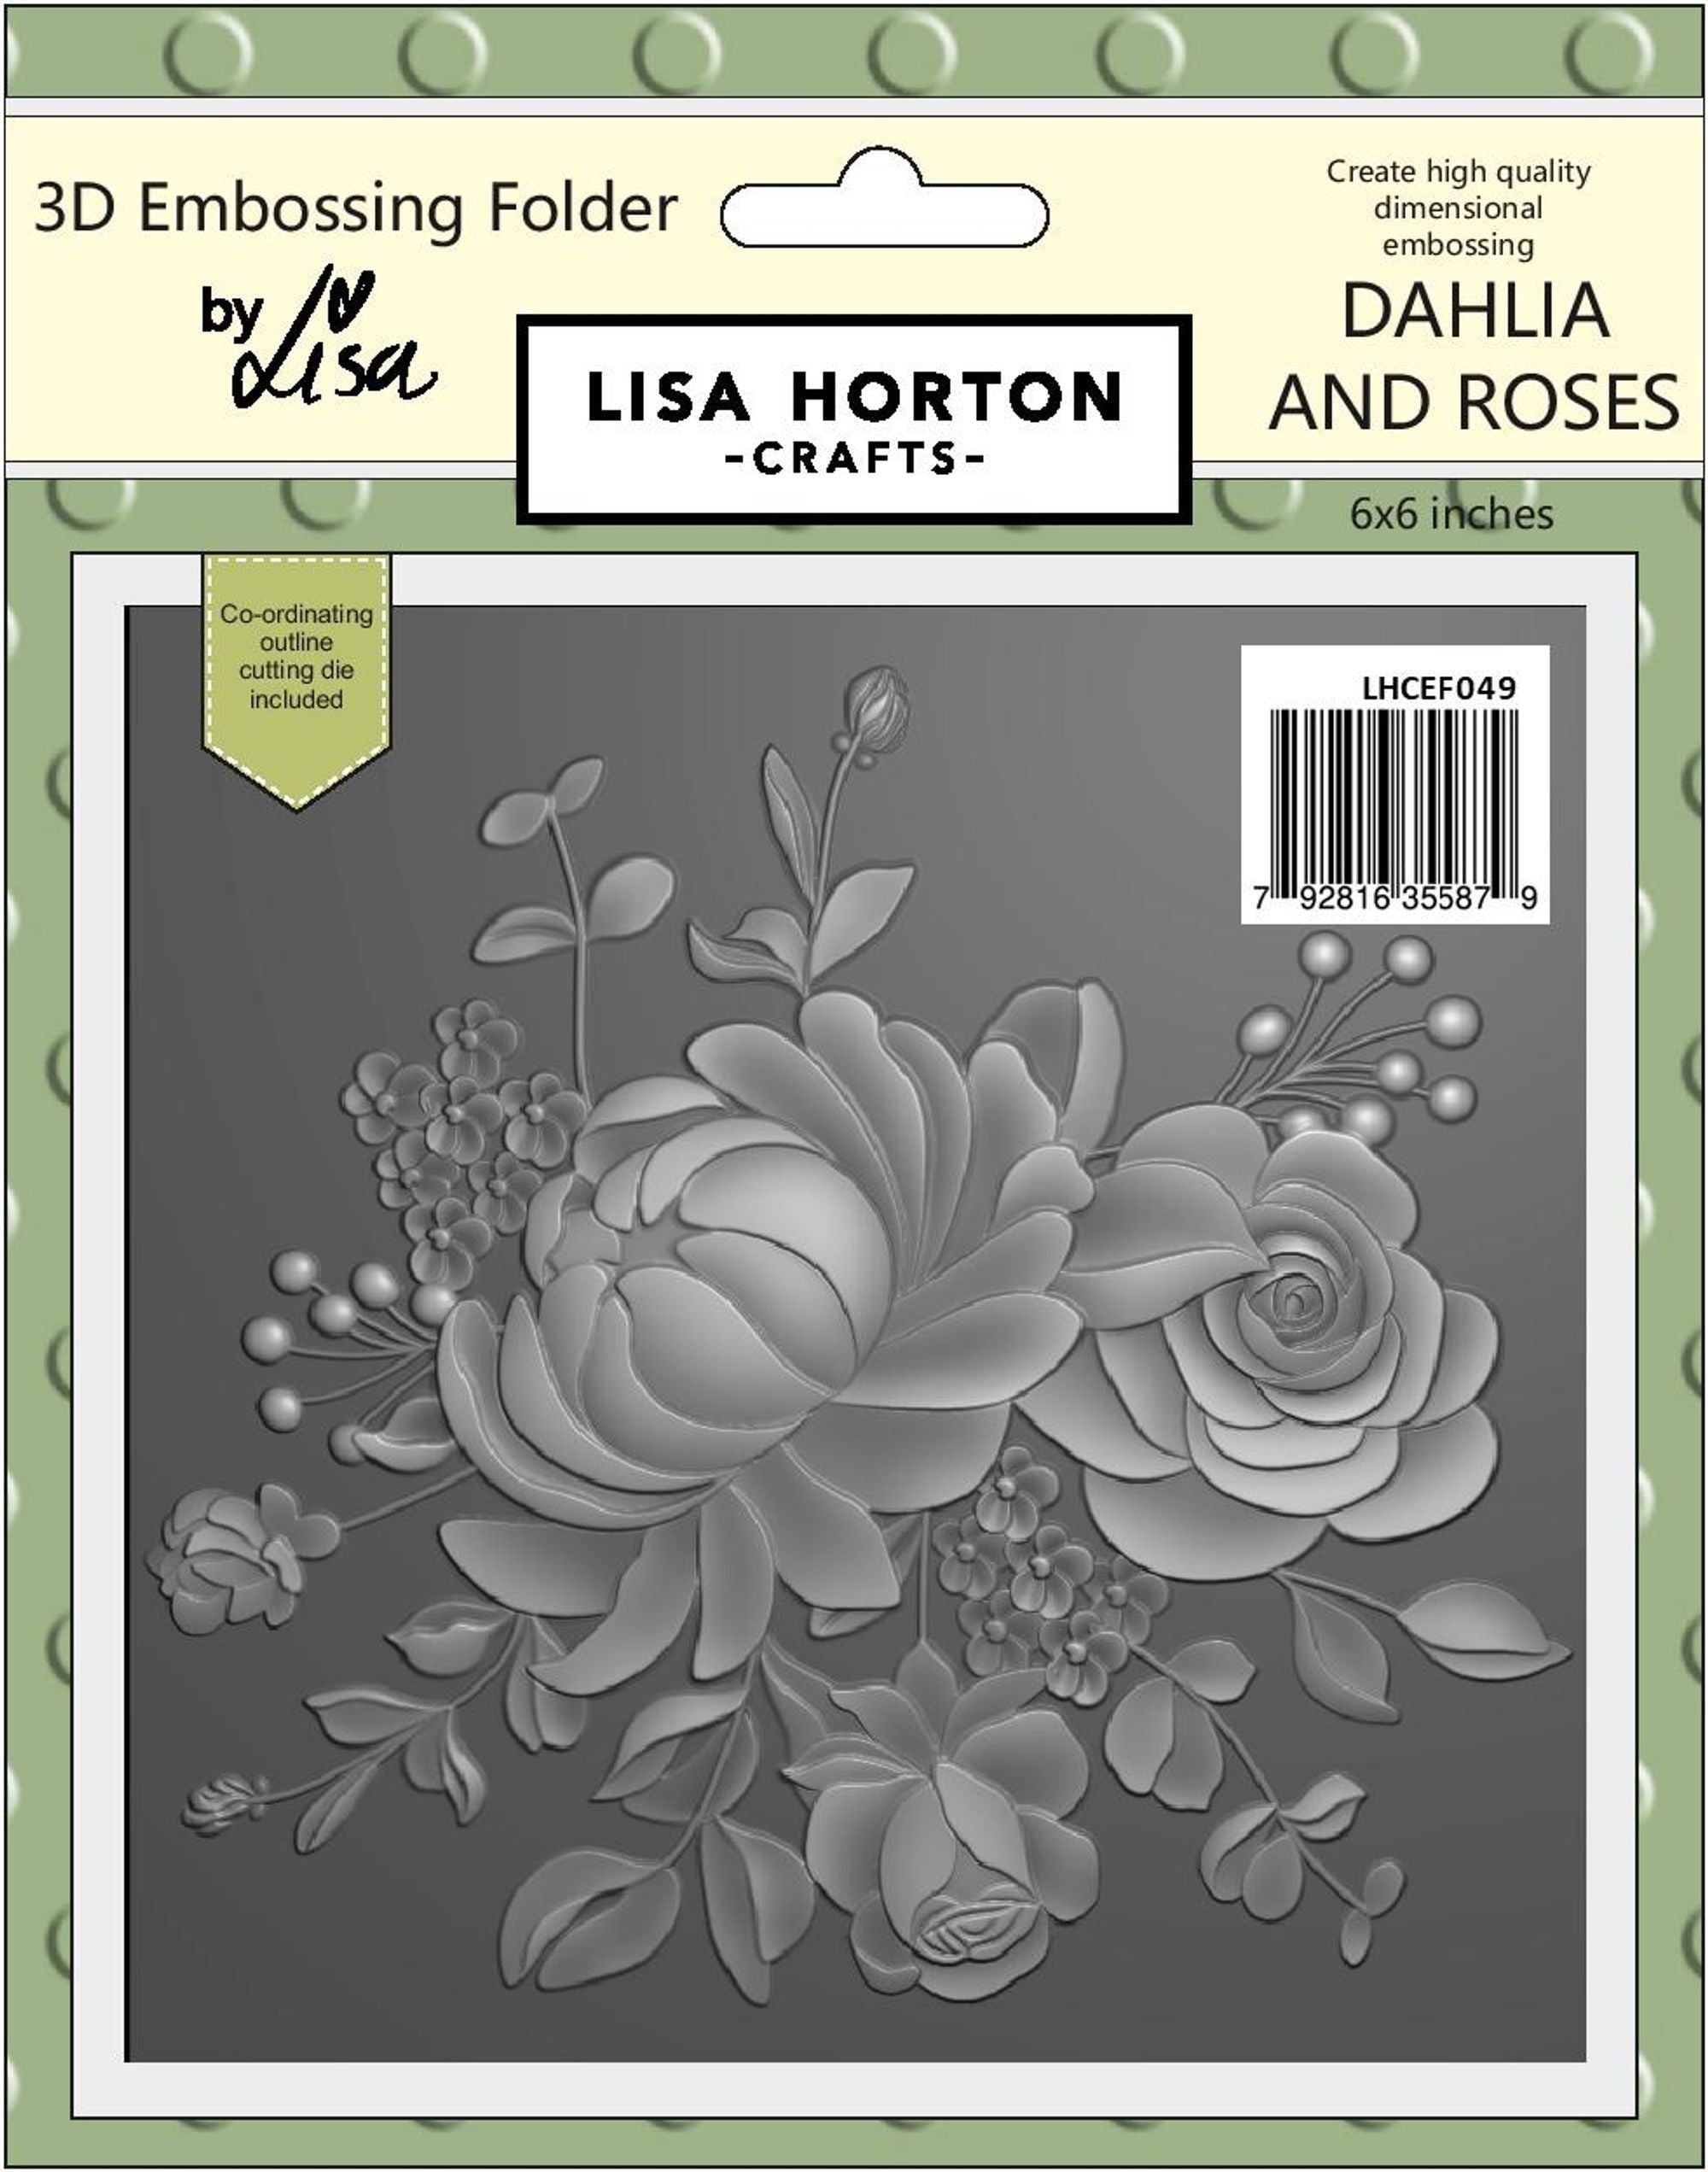 Dahlia And Roses 6x6 3D Embossing Folder With Cutting Die